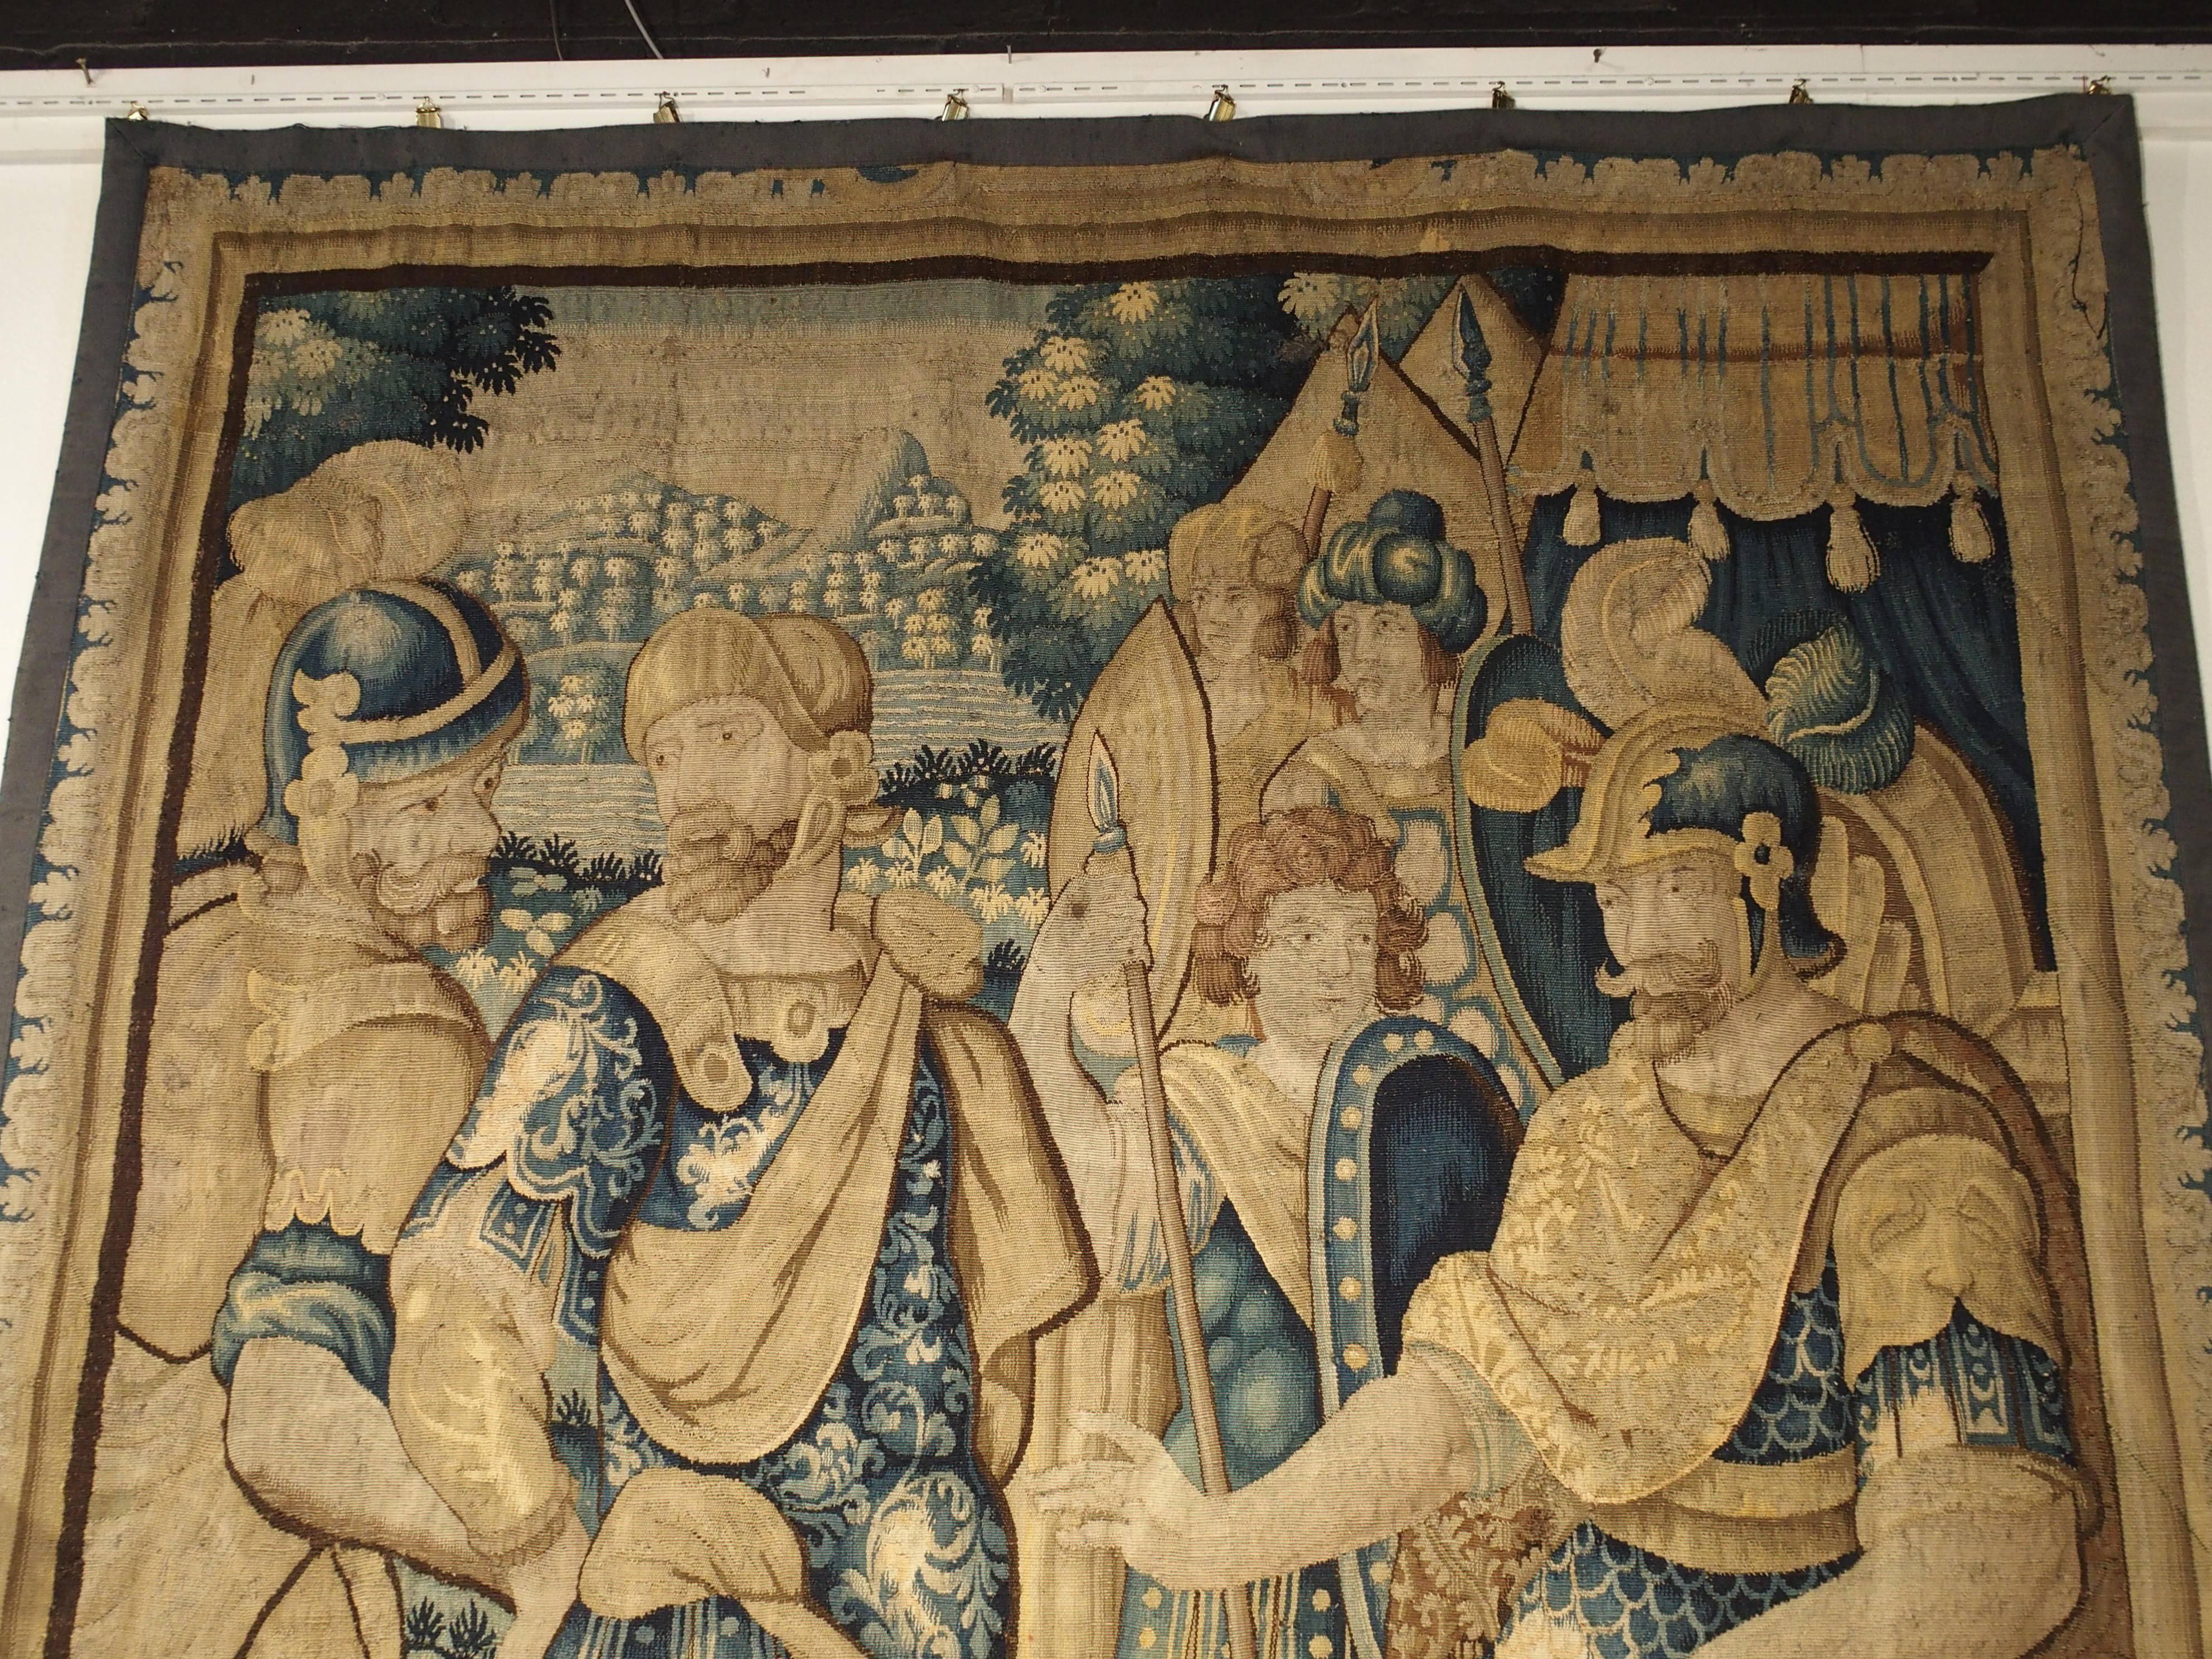 This silk and wool tapestry from Flanders was woven during the period of time when Flanders was known for weaving some of the finest tapestries. Tapestries were originally designed to protect from the damp and cold conditions of medieval castle